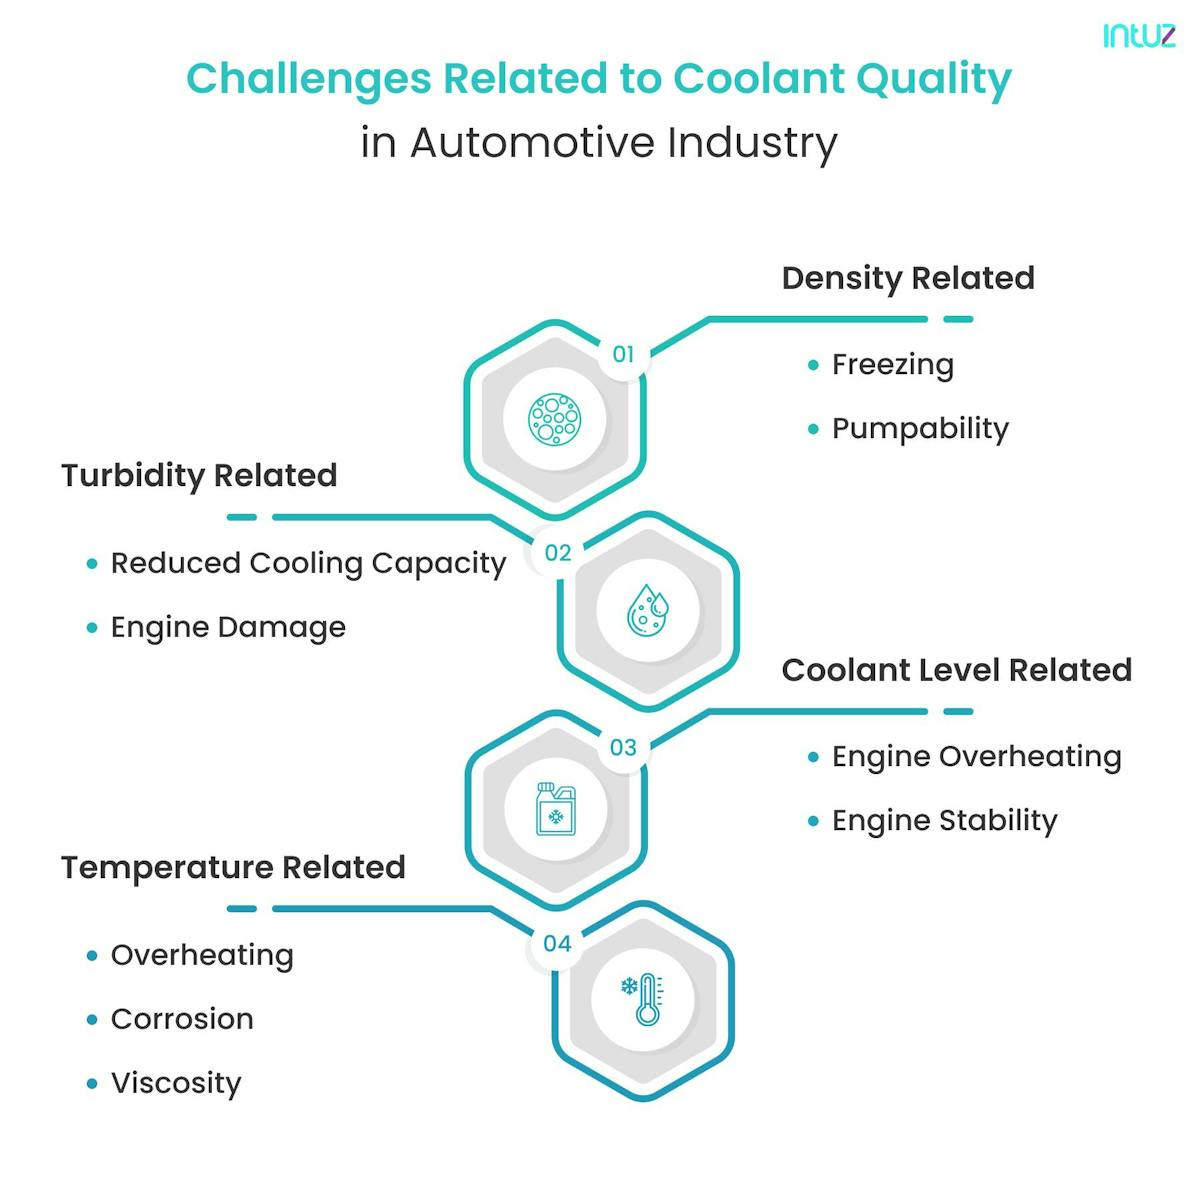 Challenges related to Coolant Quality in Automotive Industry